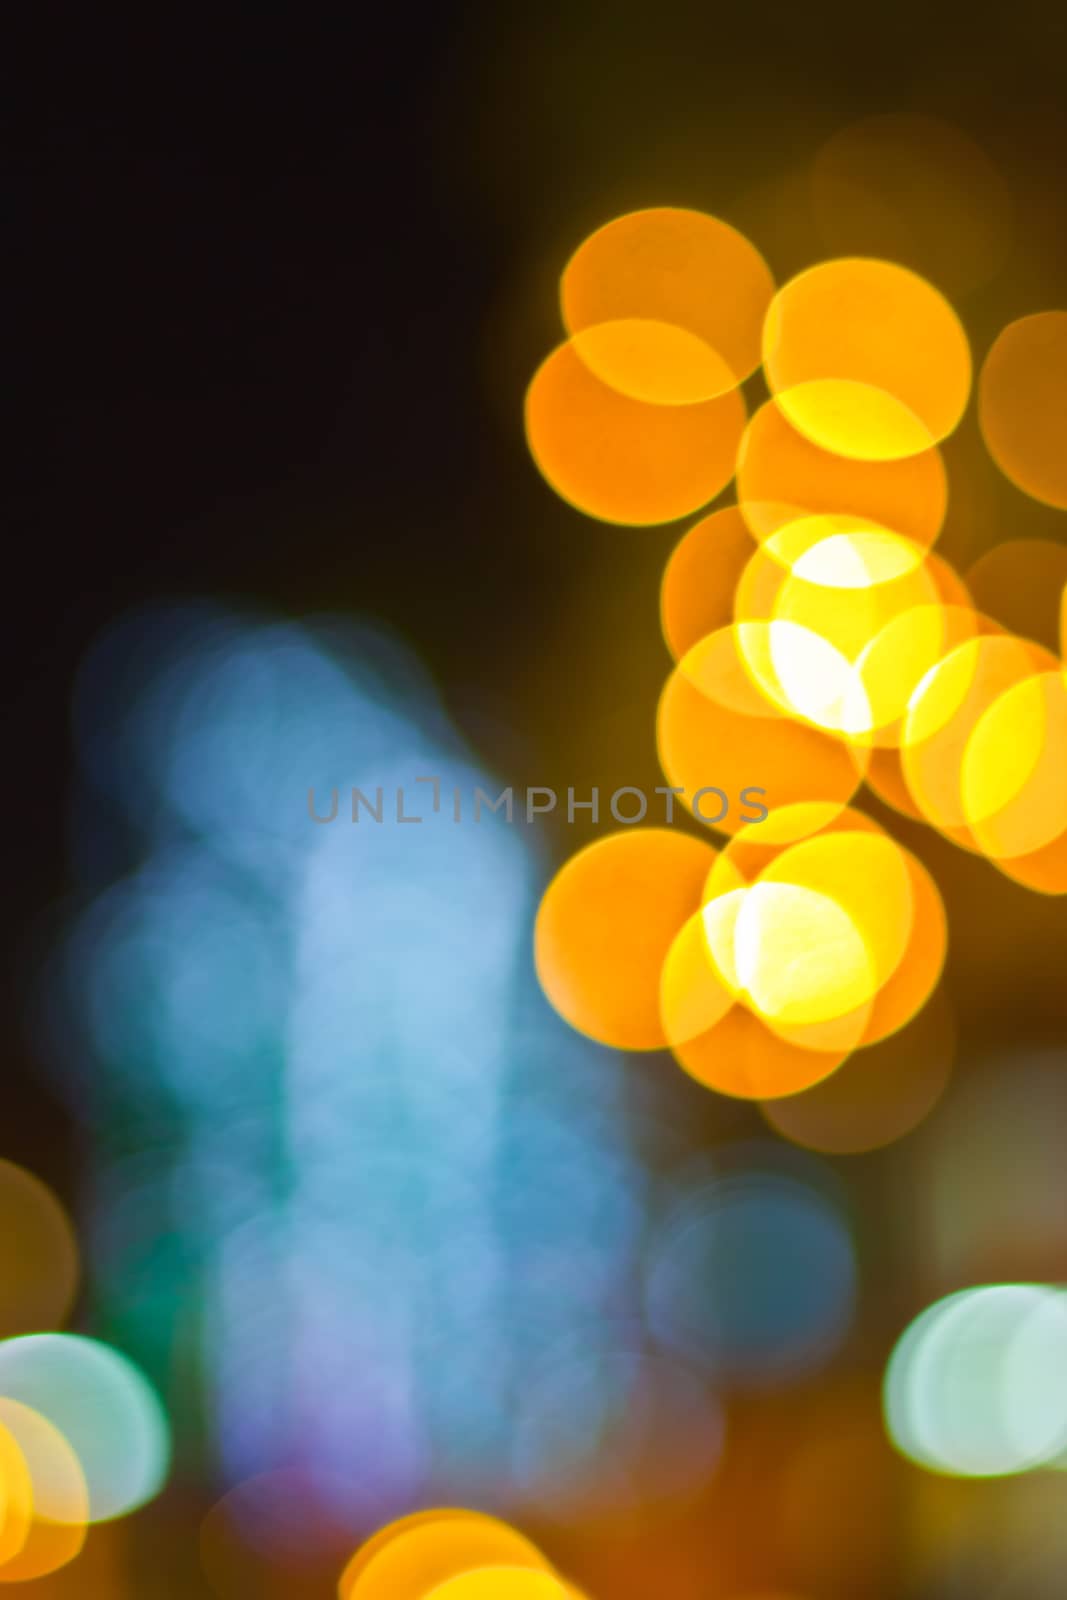 bokeh blurred out of focus background  by nikky1972